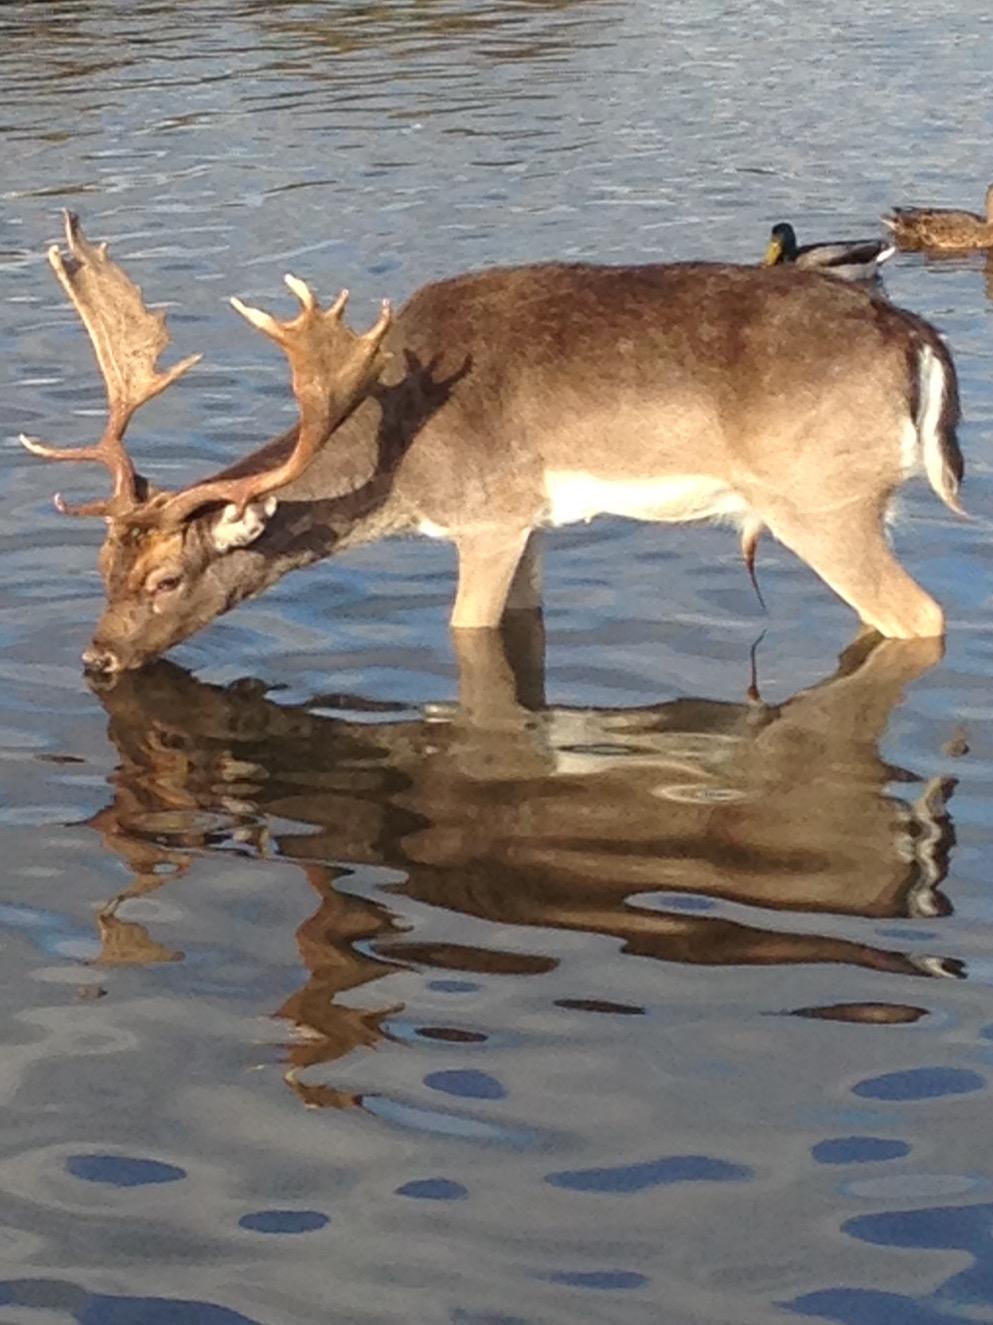 Carmel Wallace sent in this photo of a young stag at Bushy Park on February 17